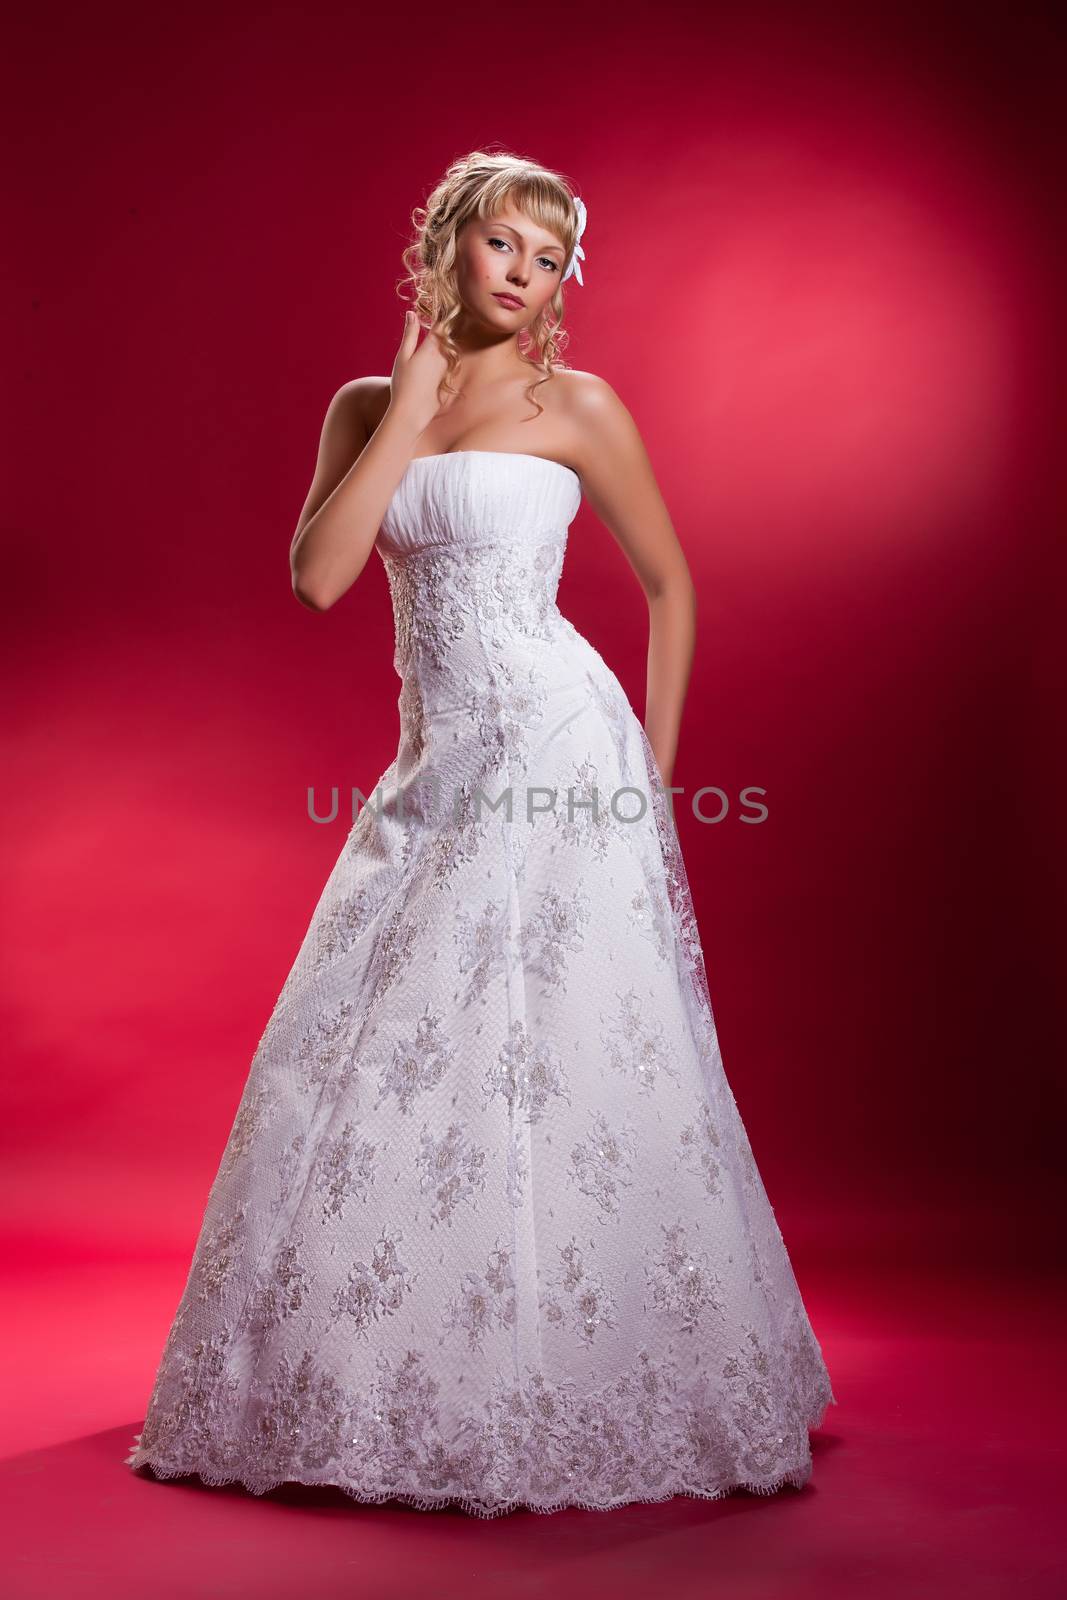 Young woman in a wedding dress on a studio background